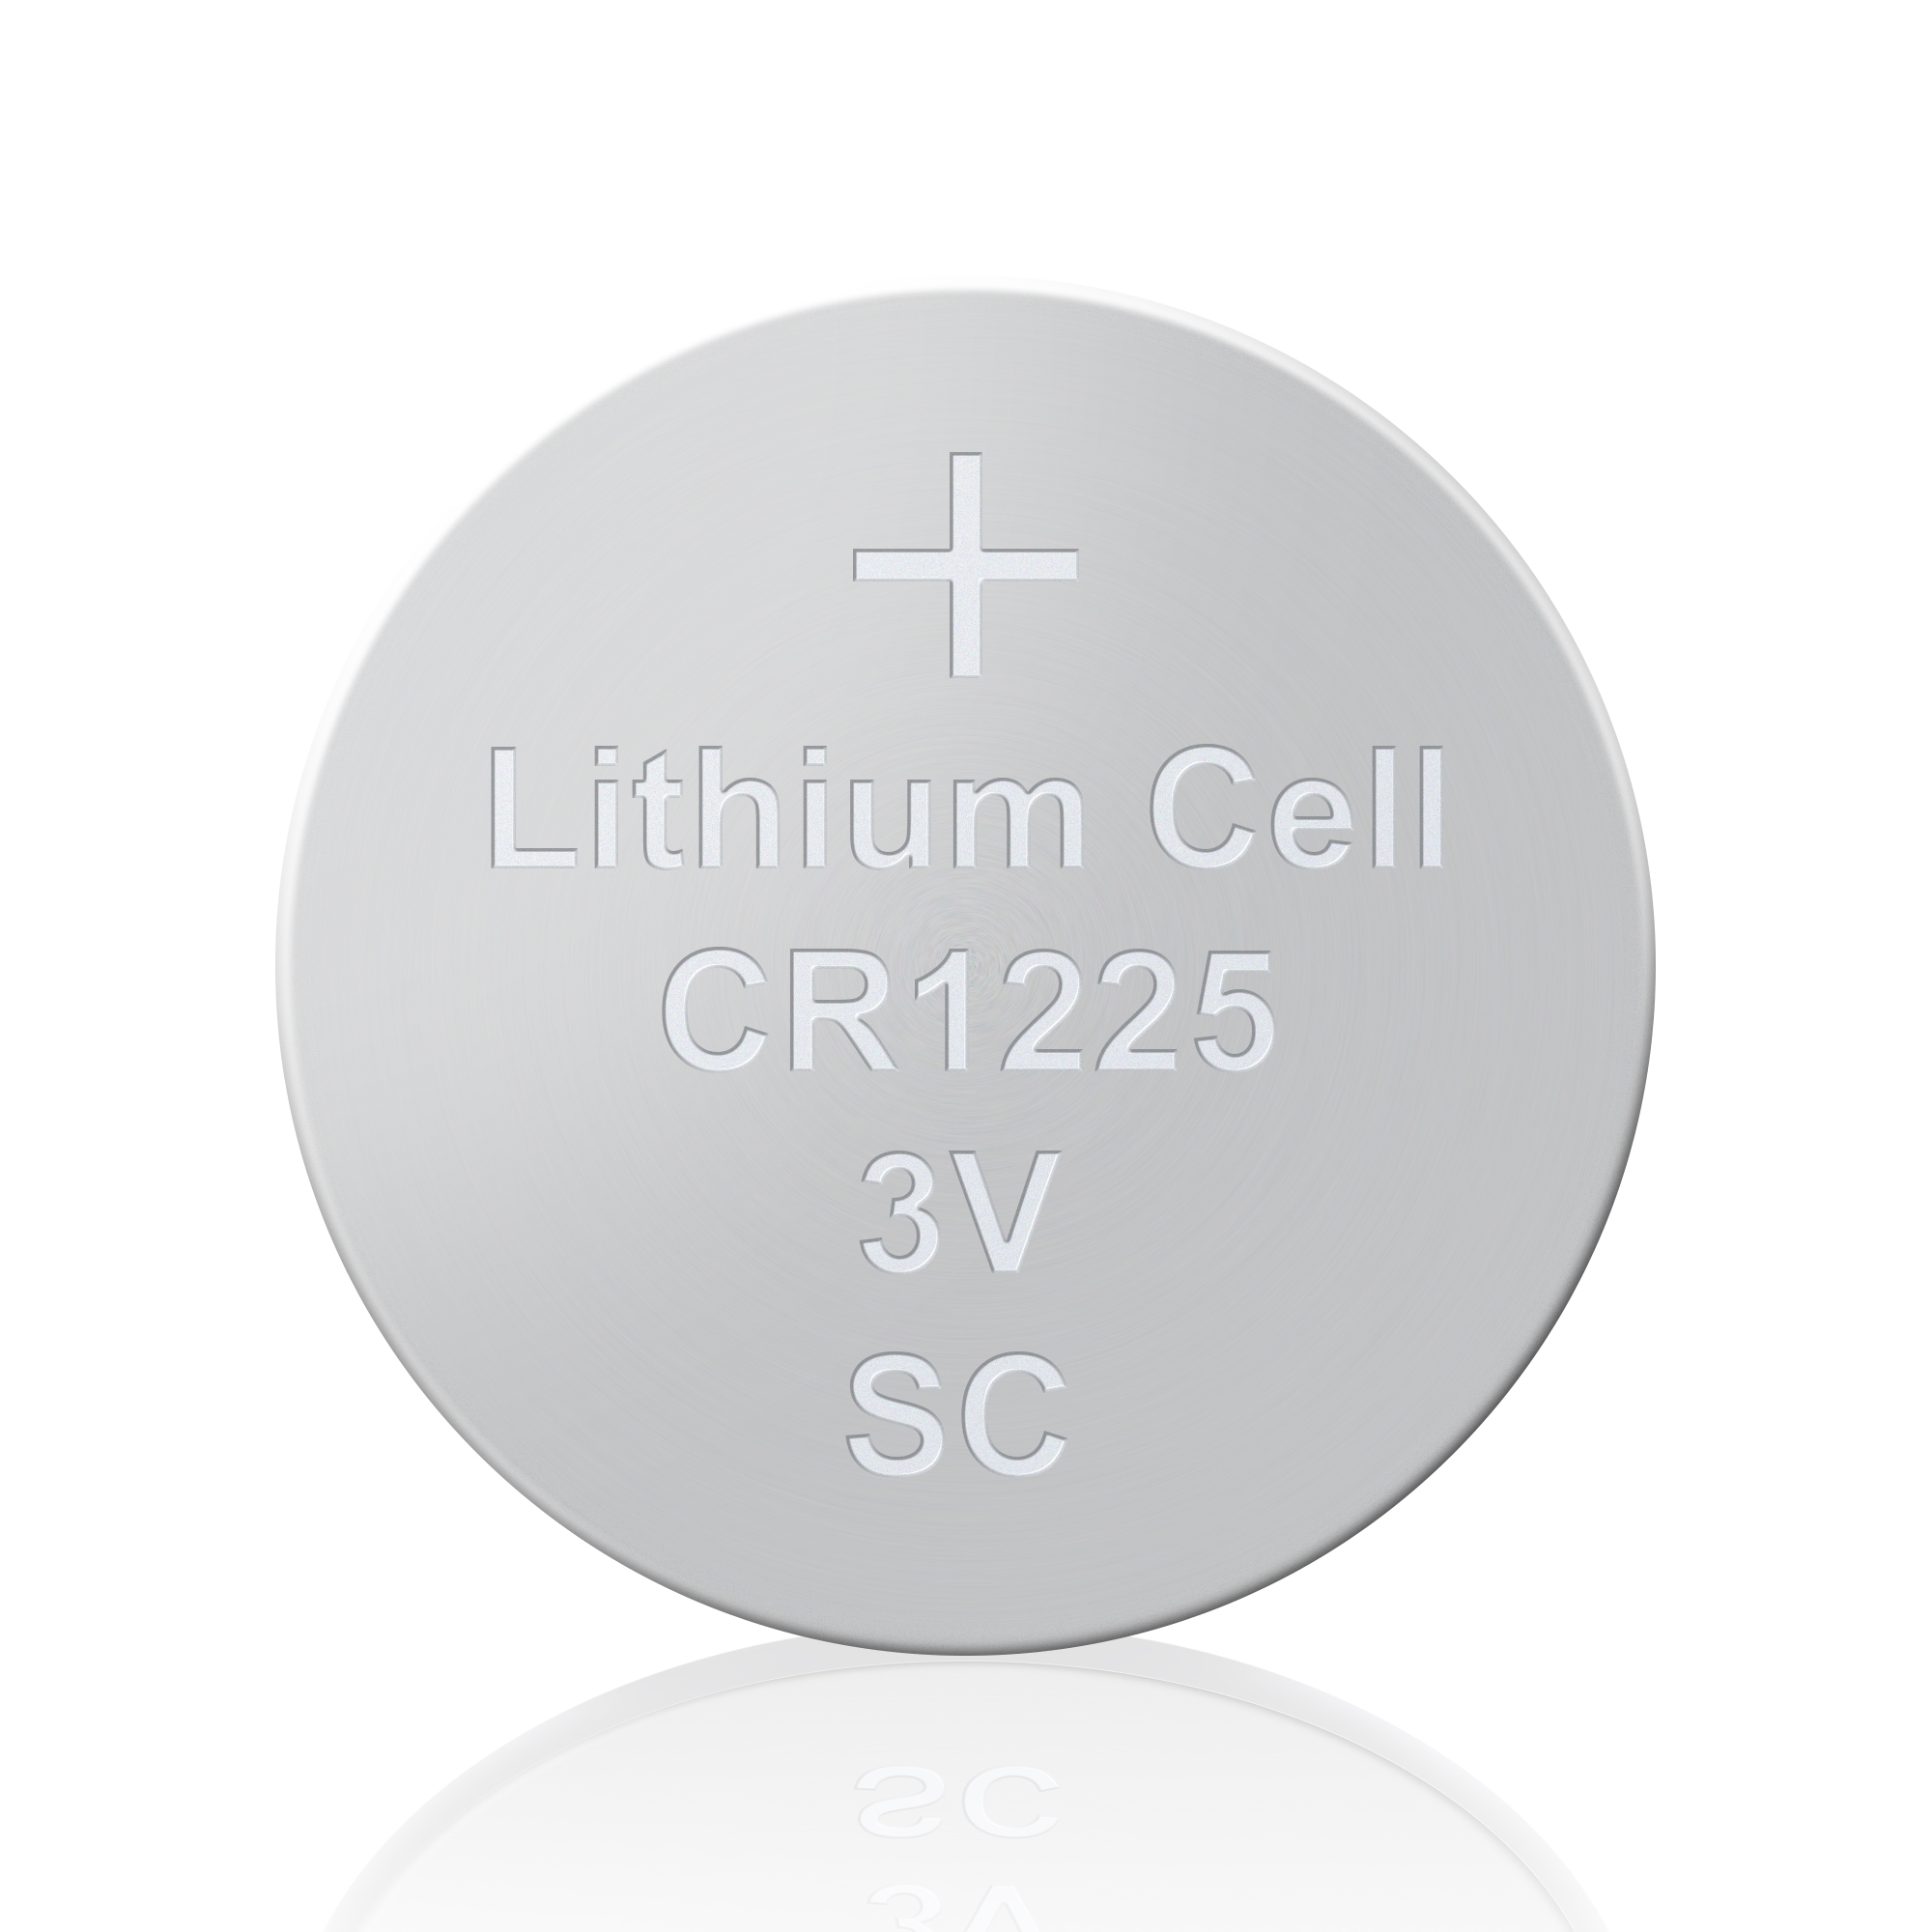 Lithium Cell CR1225